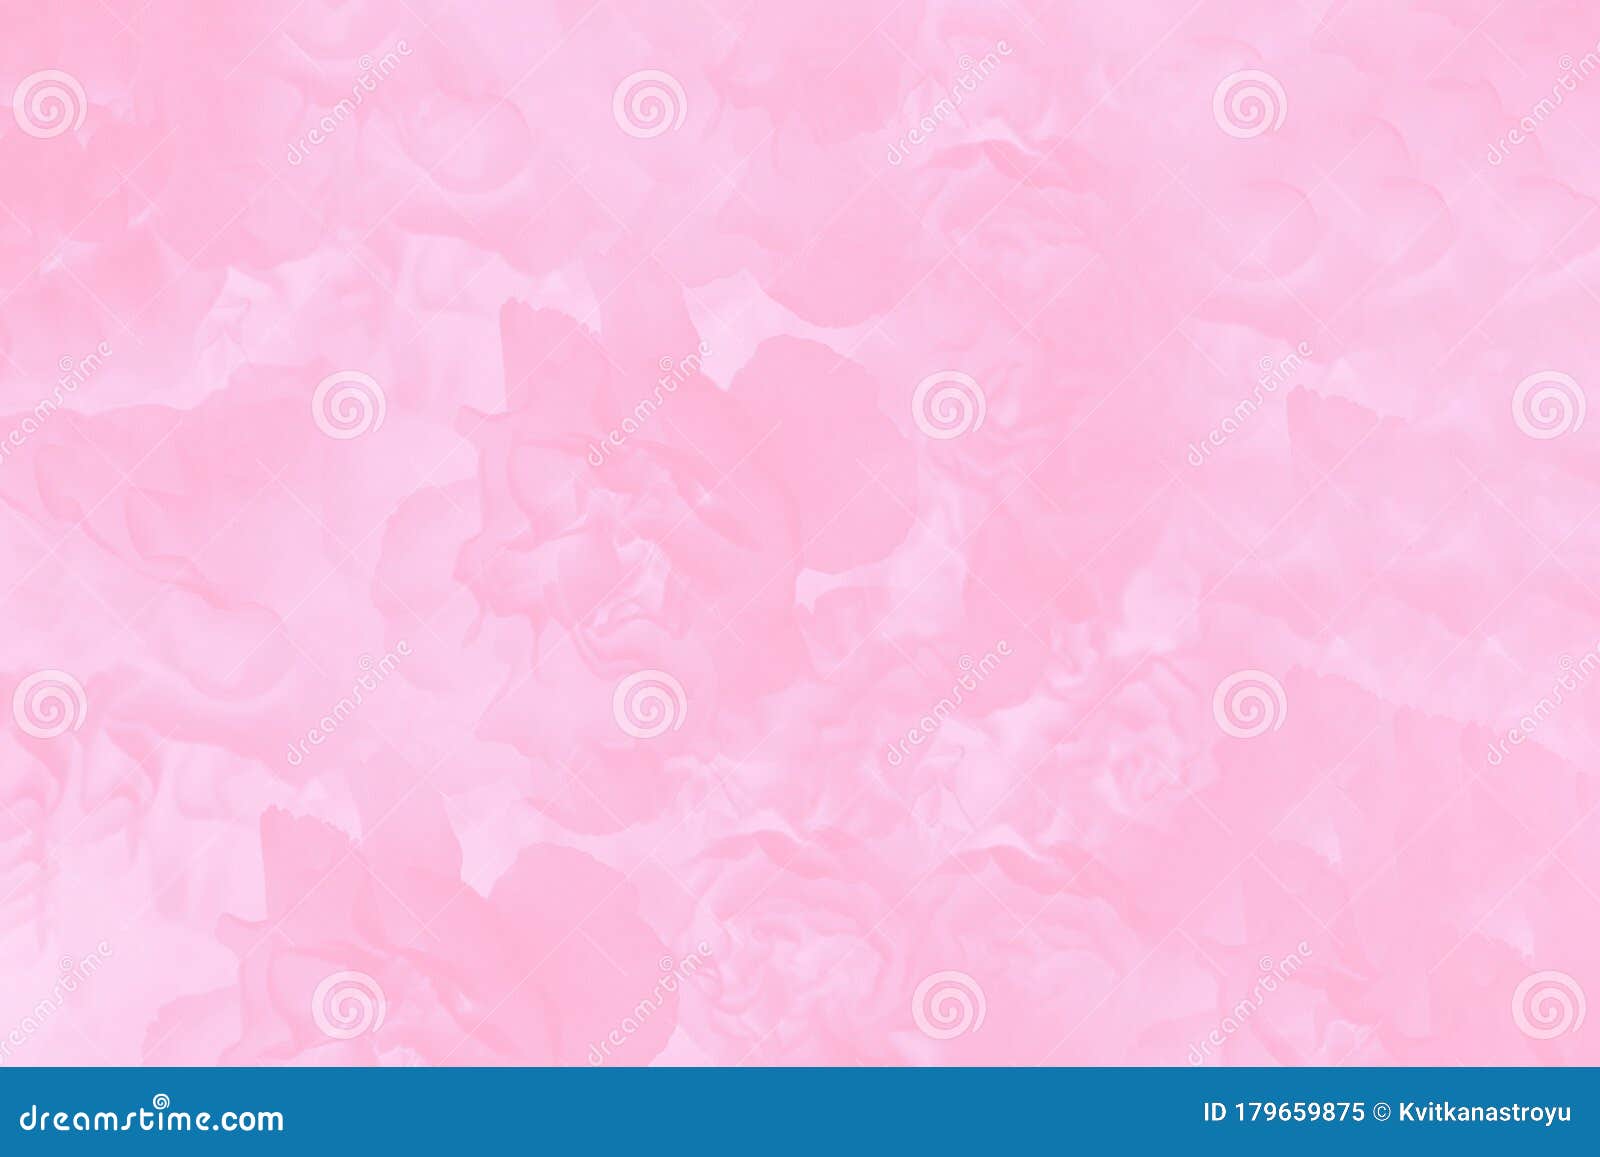 Pale Pink Abstract Background. Floral Gradient Background, Delicate ...